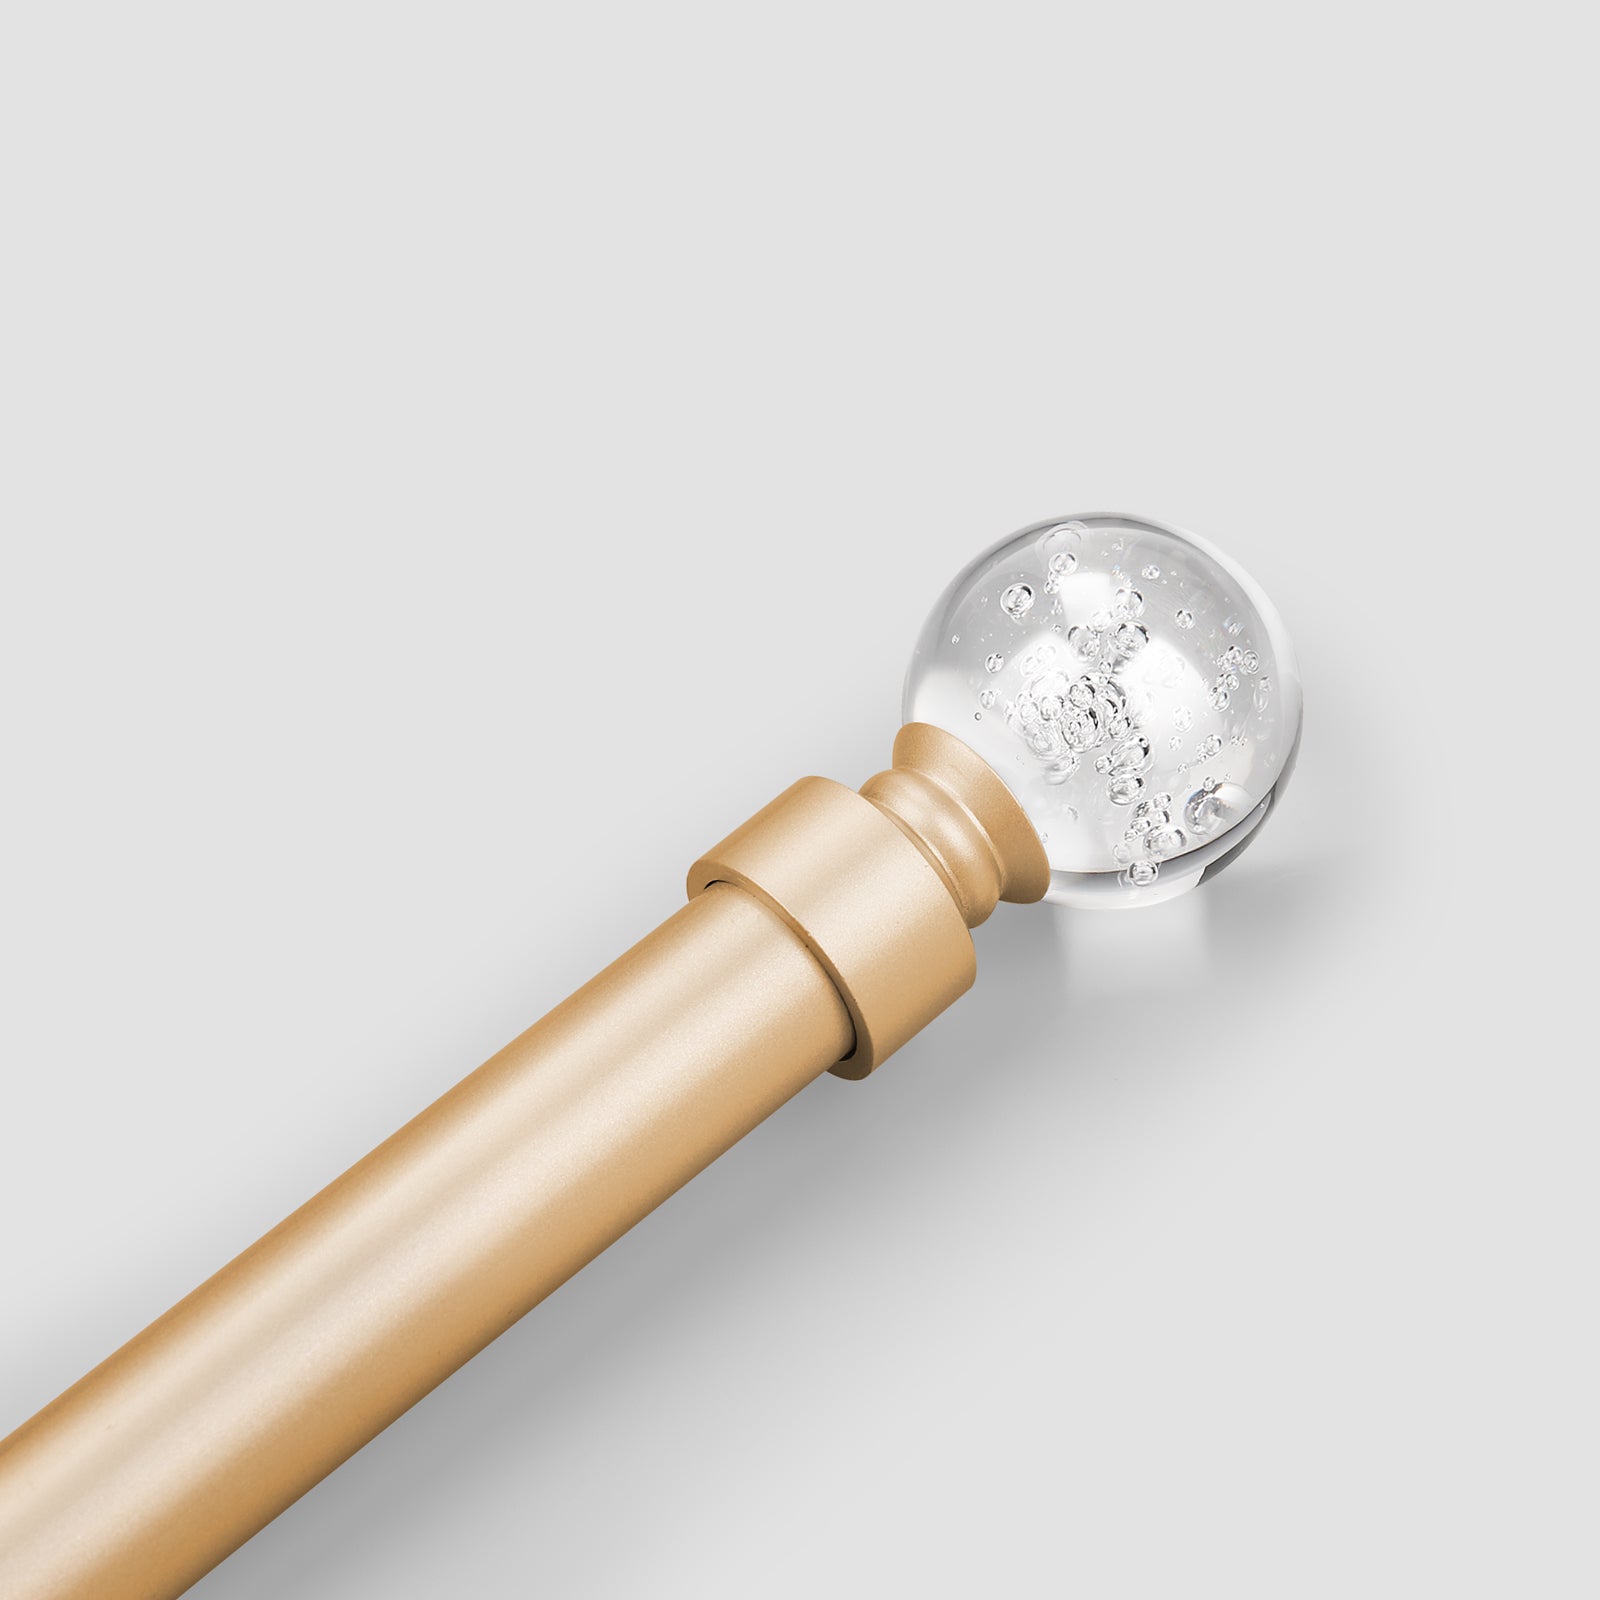 1 Inch Brass Adjule Dry Rod With Crystal Ball Finials 22 To 8 Well